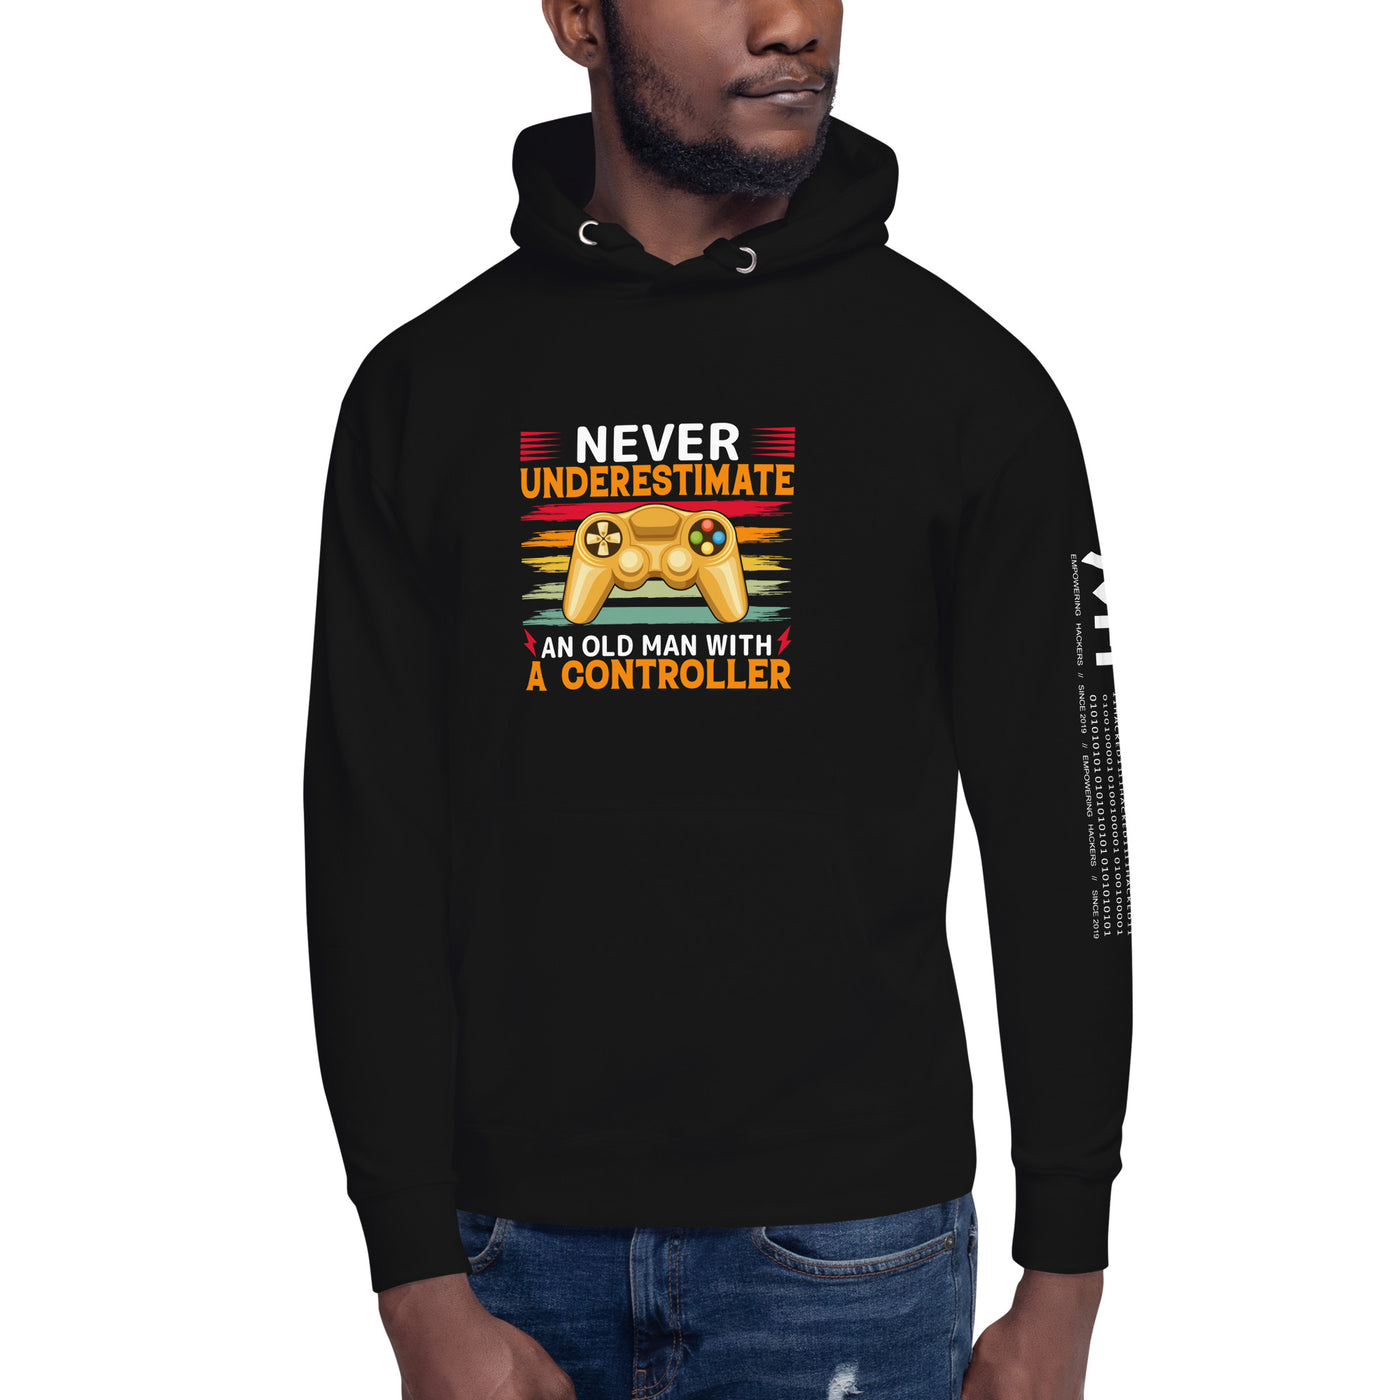 Never Underestimate an old man with a controller - Unisex Hoodie